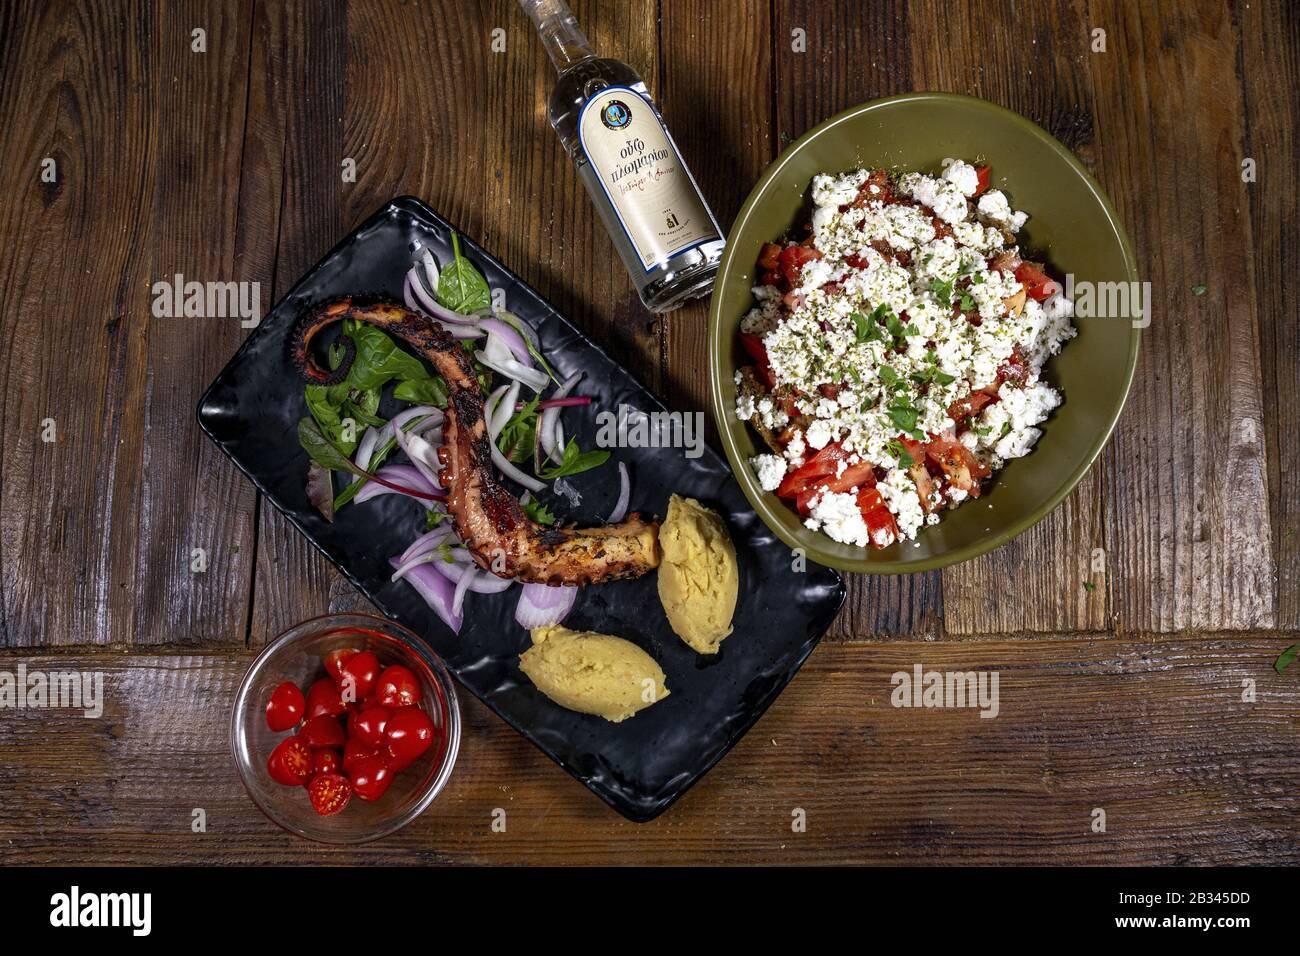 THESSALONIKI, GREECE - Feb 17, 2020: An overhead closeup shot of various seafood and salad dishes with feta cheese and tomato, roasted octopus and Plo Stock Photo